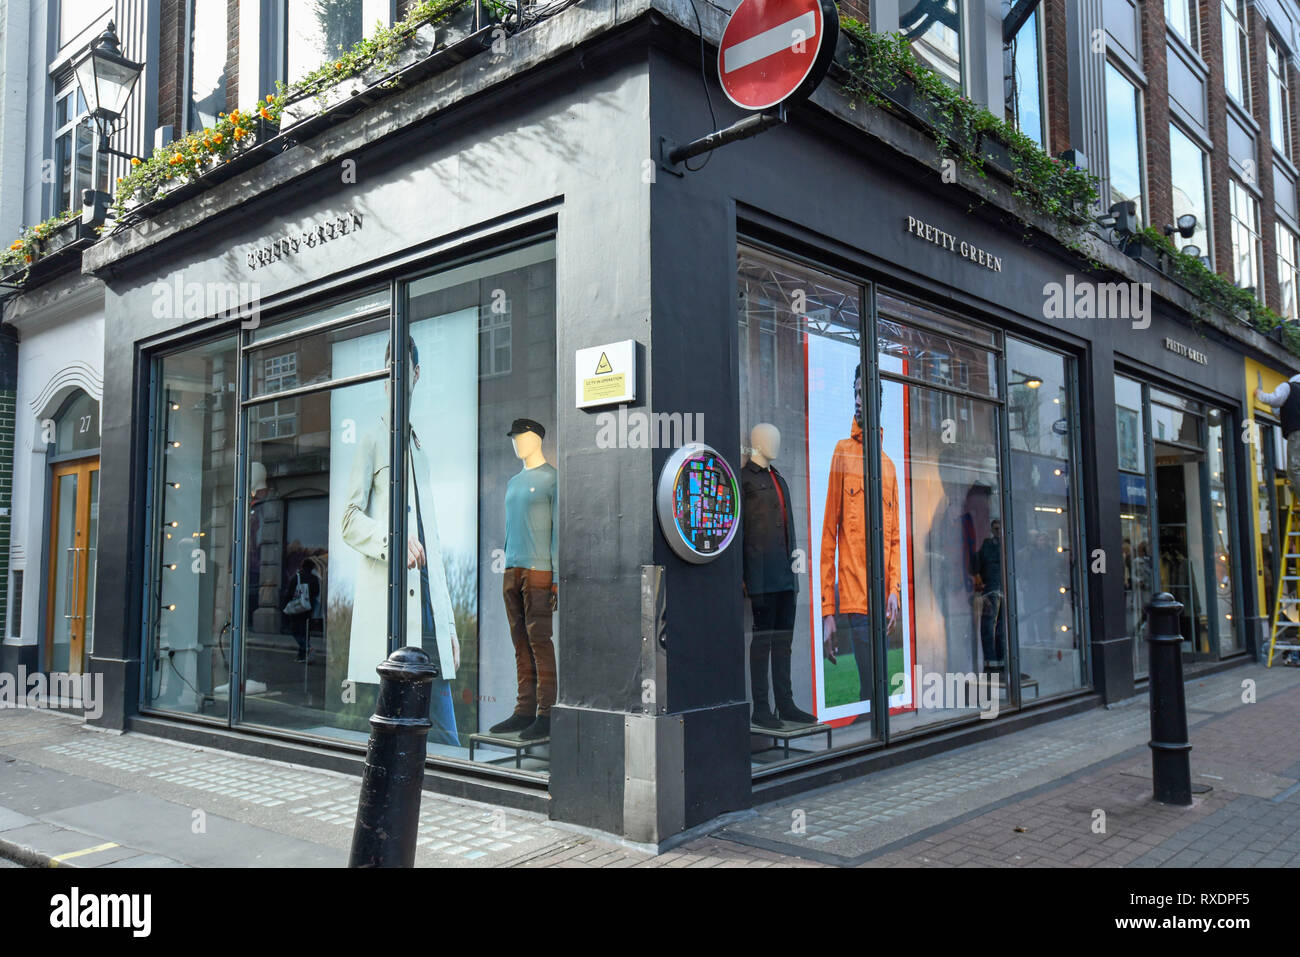 London, UK.  9 March 2019. The exterior of Pretty Green in Carnaby Street.  Pretty Green, a menswear brand founded by Oasis singer Liam Gallagher, has called in advisers to review options for the future of the business.  The loss making company has suffered further, with both the Chairman and finance director leaving recently.  The company's problems coincide with women's fashion brand LK Bennett entering administration in the last few days. Credit: Stephen Chung / Alamy Live News Stock Photo